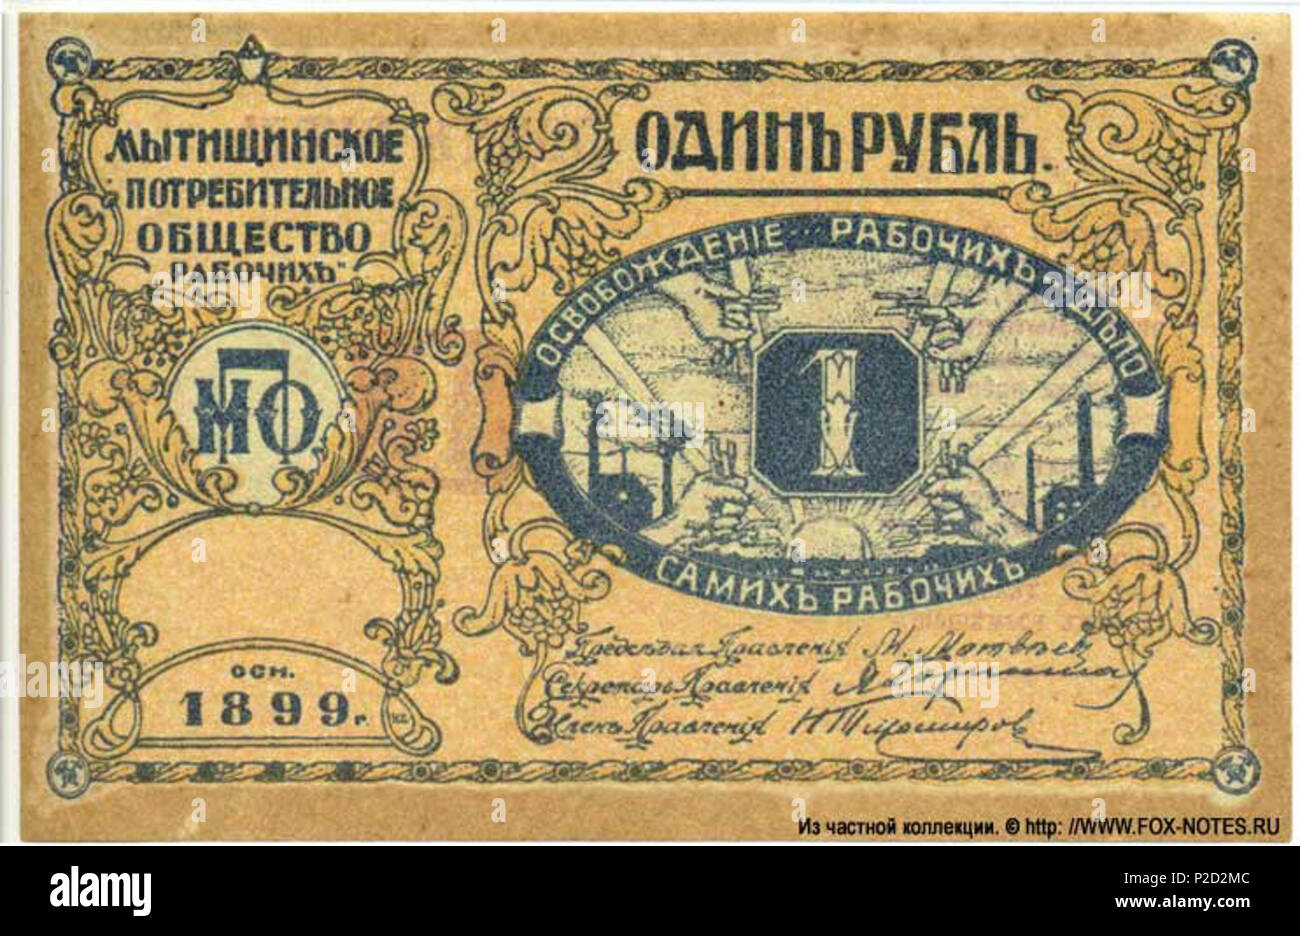 . English: Mytishchi consumer society of workers bon valued 1 ruble . 02.08.2013. Private collection of FOX-NOTES.RU 2 1R8876 nd 1r f Stock Photo